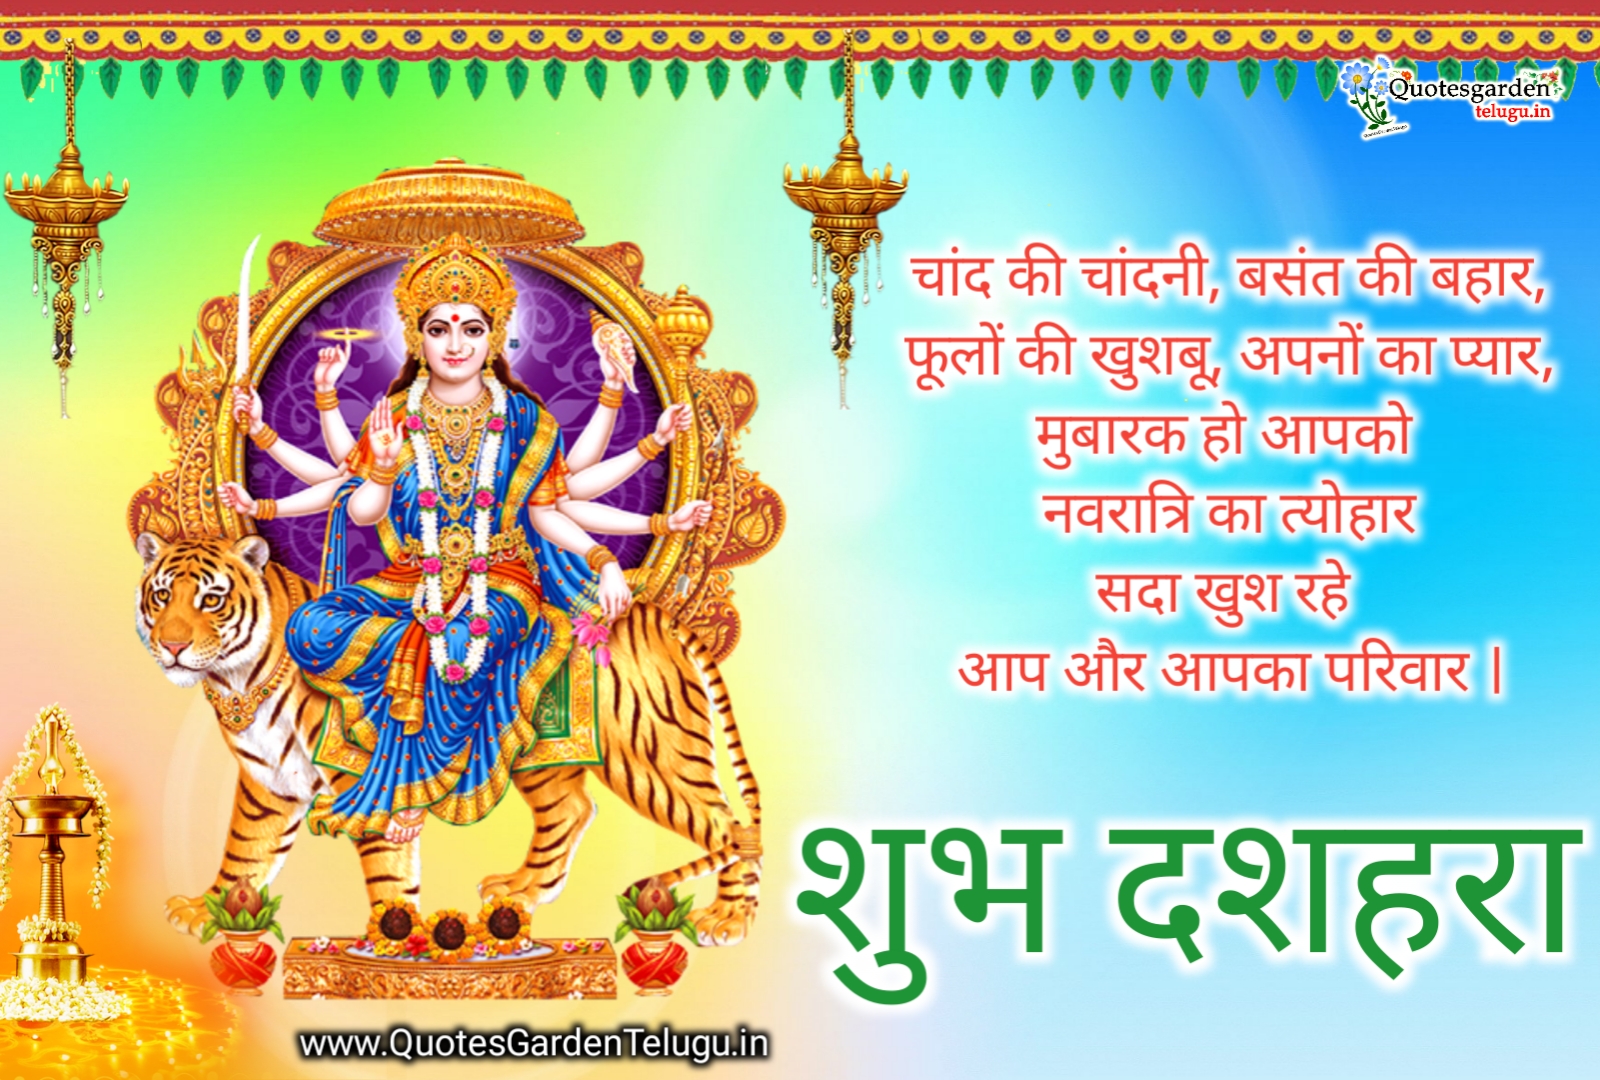 Dussehra greetings best wishes images messages in hindi | QUOTES ...